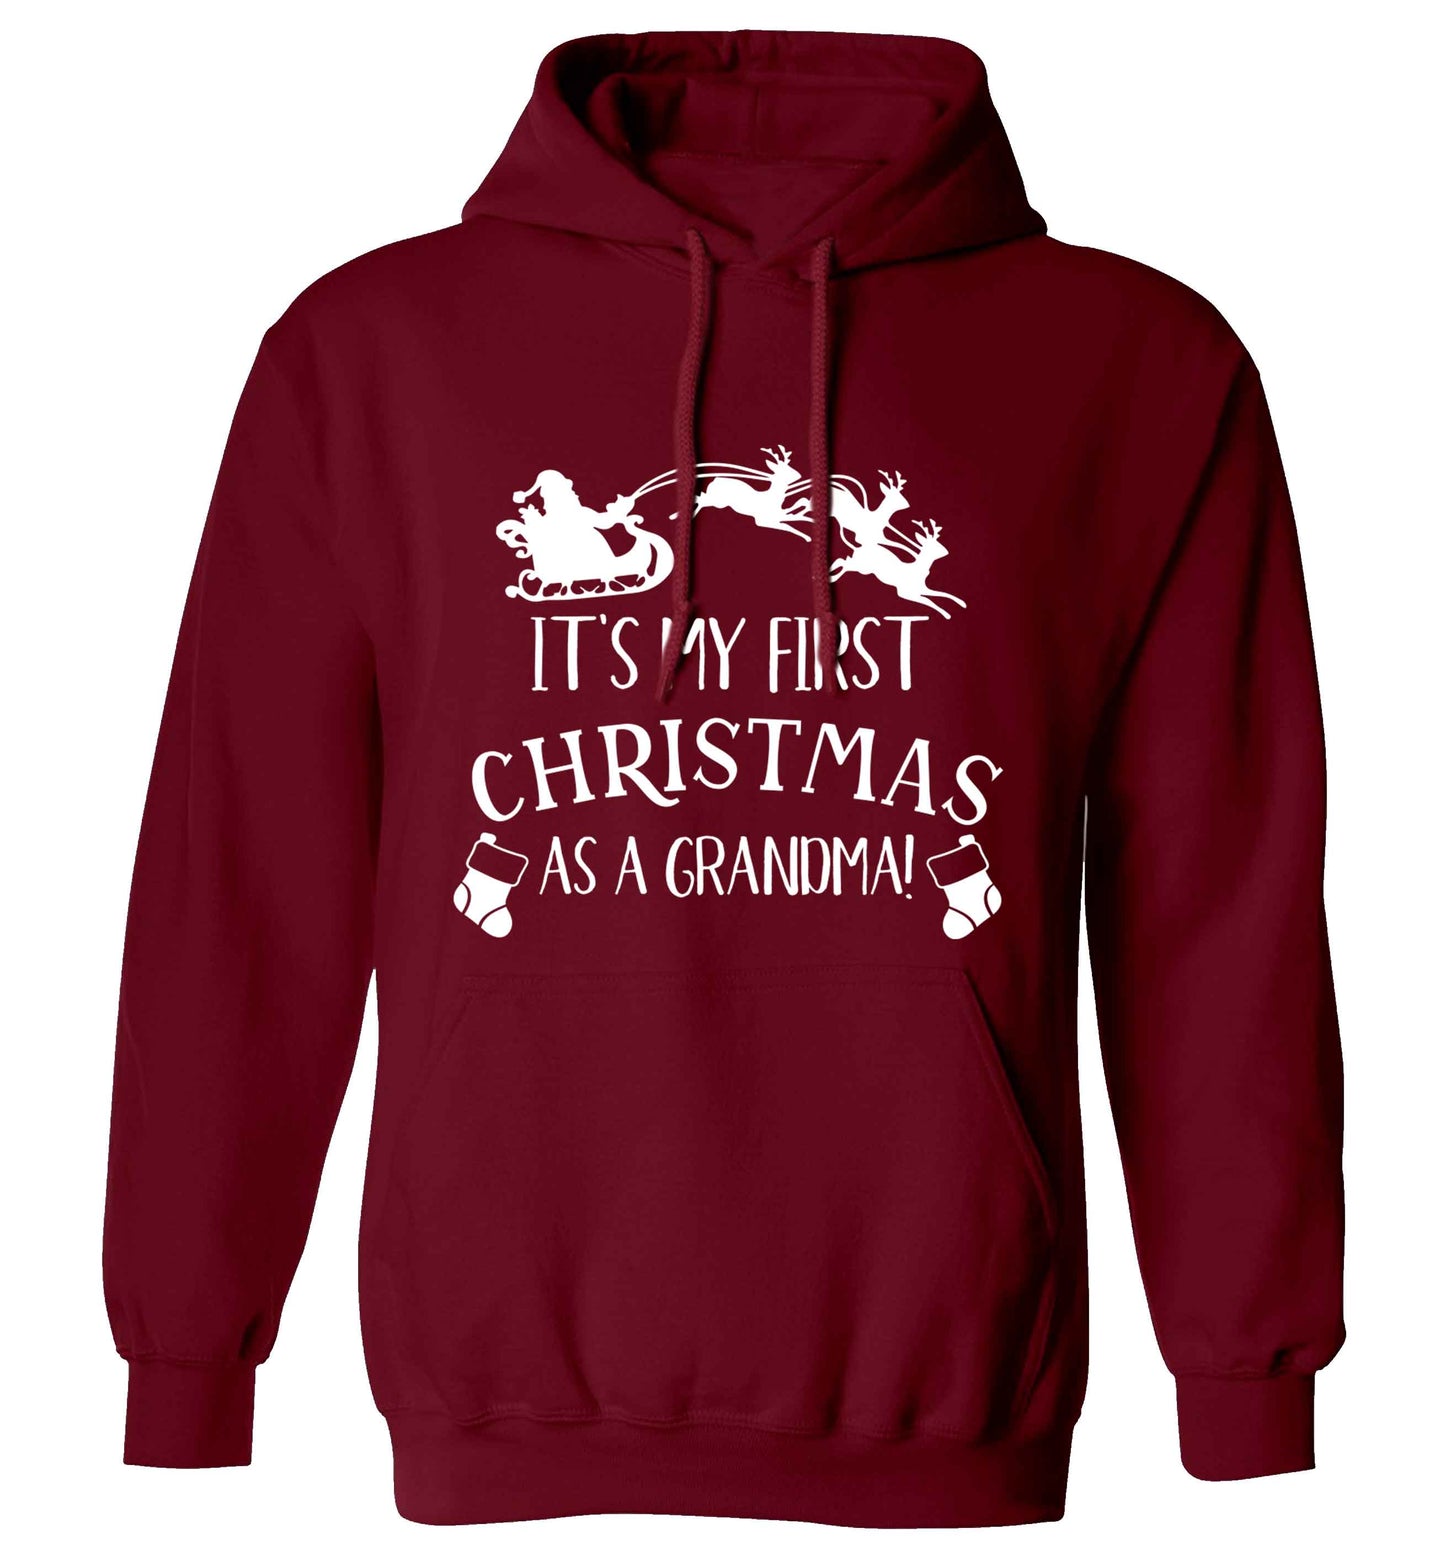 It's my first Christmas as a grandma! adults unisex maroon hoodie 2XL